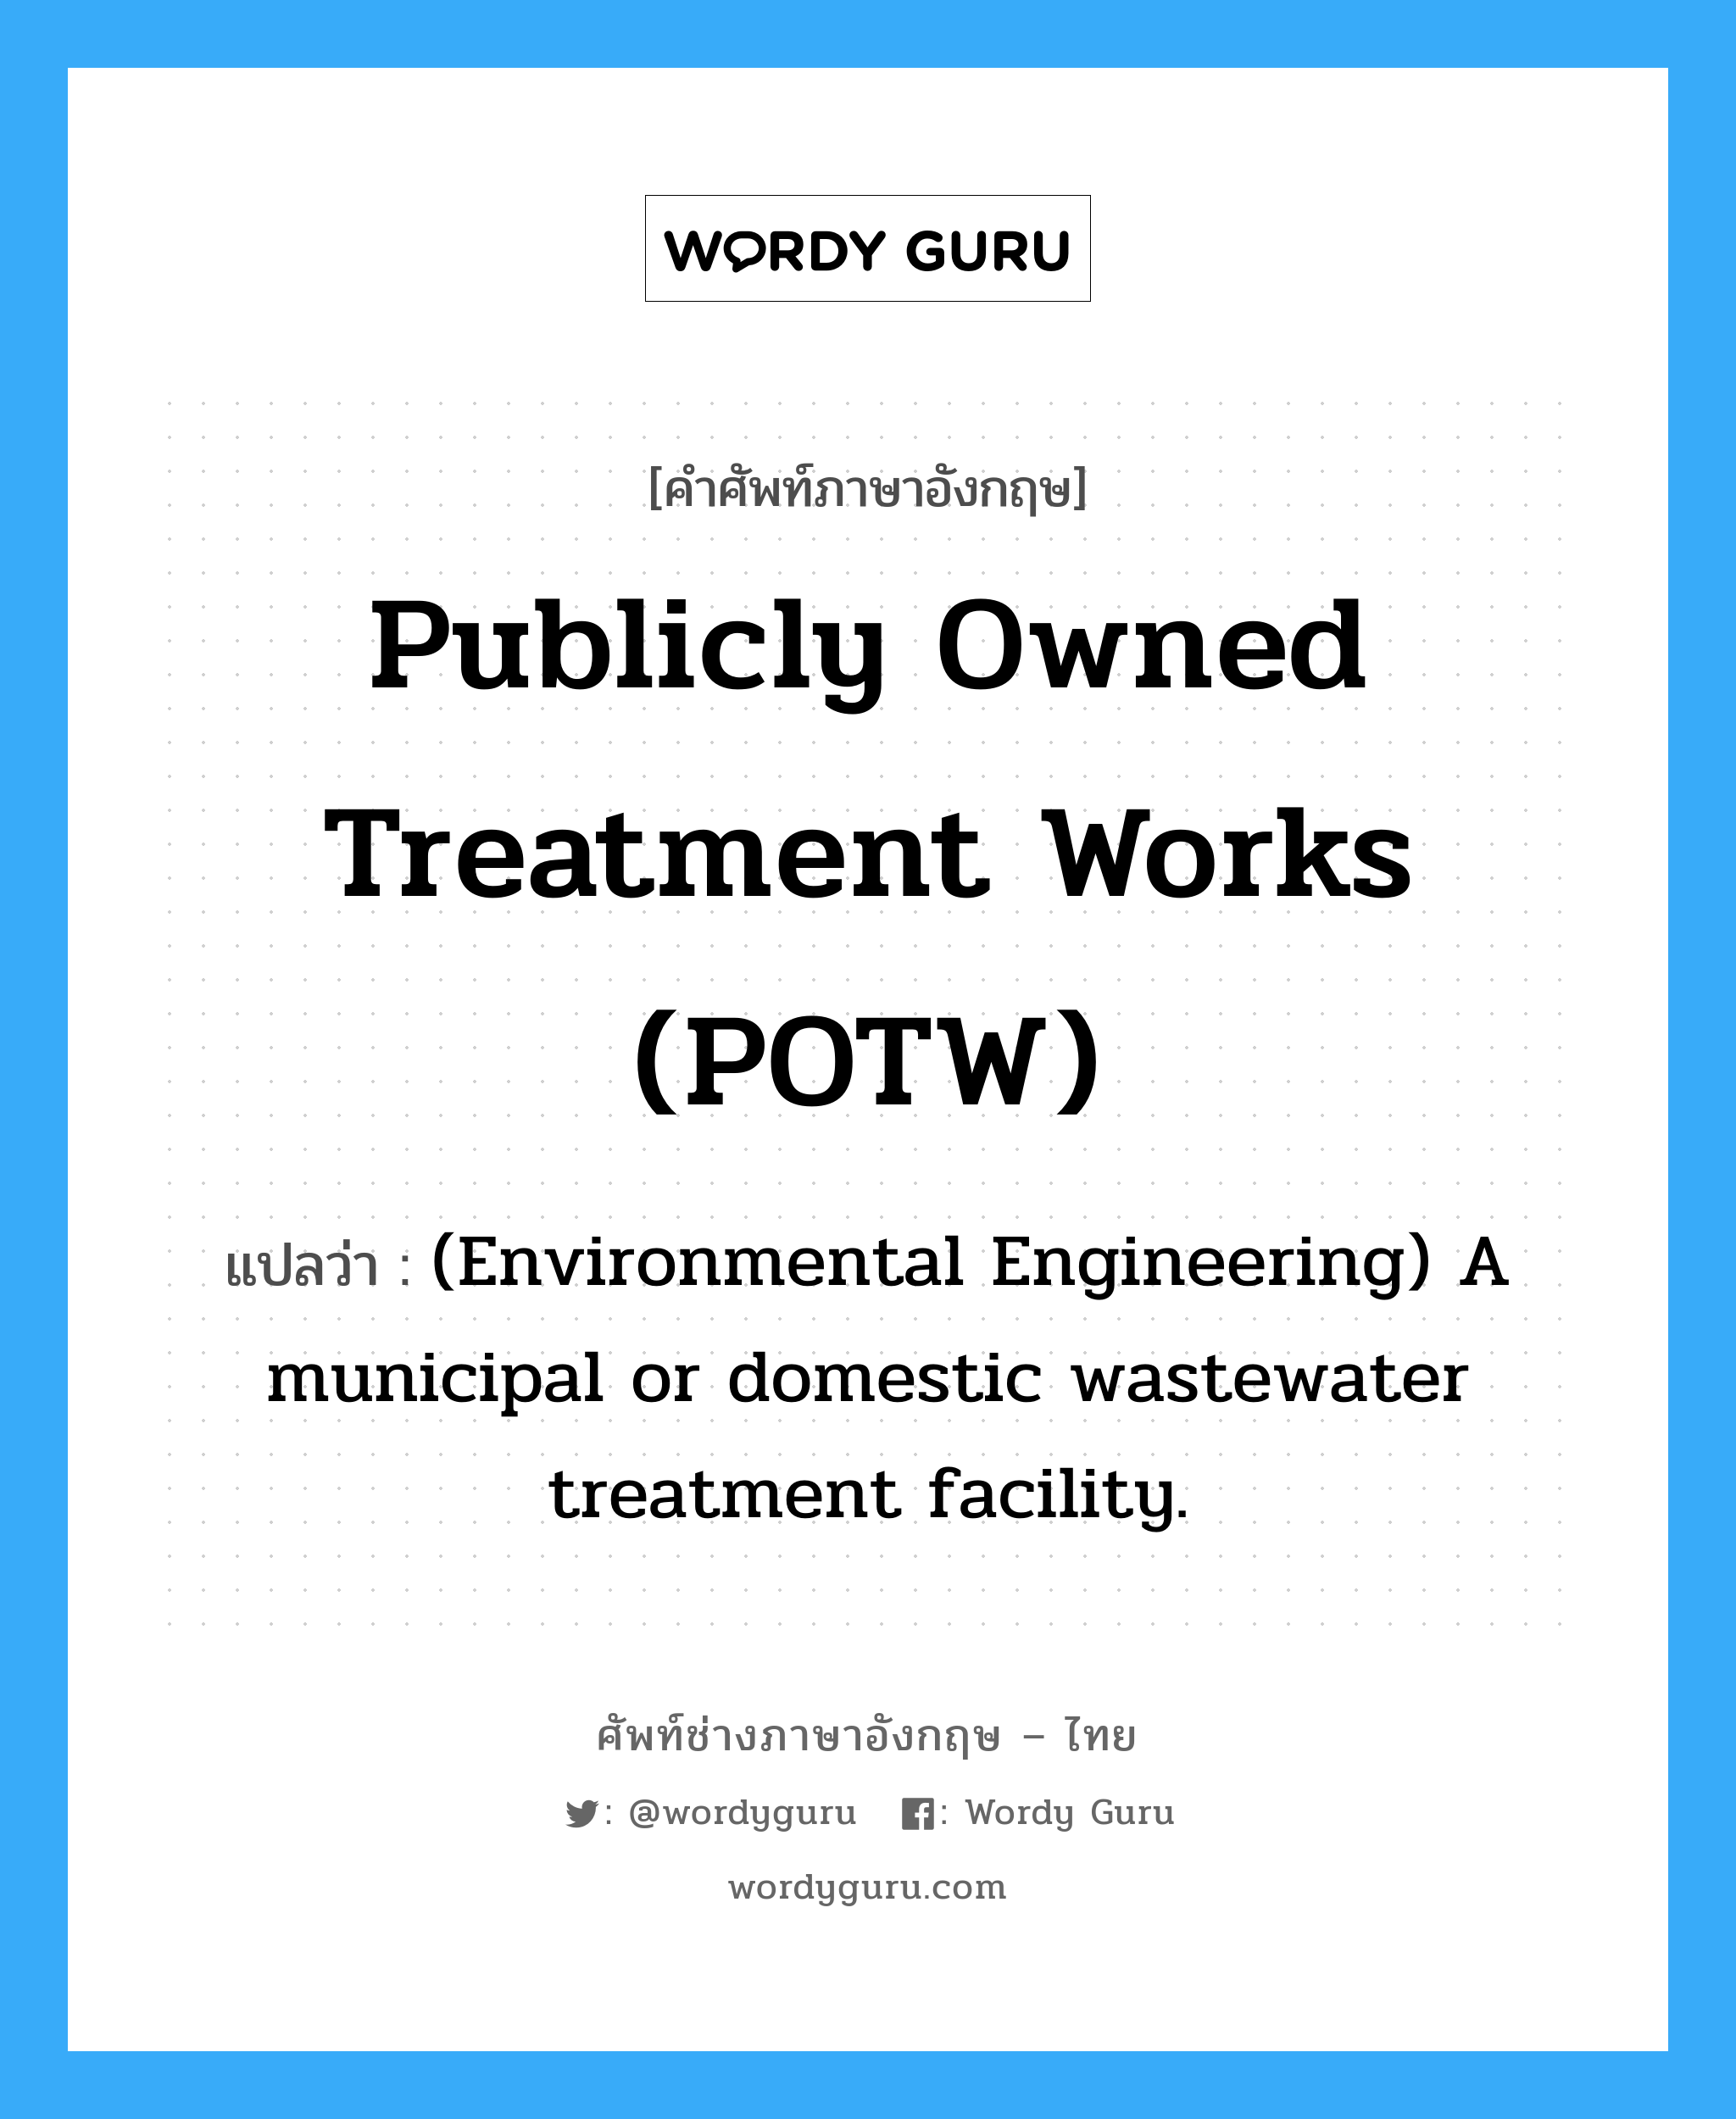 (Environmental Engineering) A municipal or domestic wastewater treatment facility. ภาษาอังกฤษ?, คำศัพท์ช่างภาษาอังกฤษ - ไทย (Environmental Engineering) A municipal or domestic wastewater treatment facility. คำศัพท์ภาษาอังกฤษ (Environmental Engineering) A municipal or domestic wastewater treatment facility. แปลว่า Publicly owned treatment works (POTW)